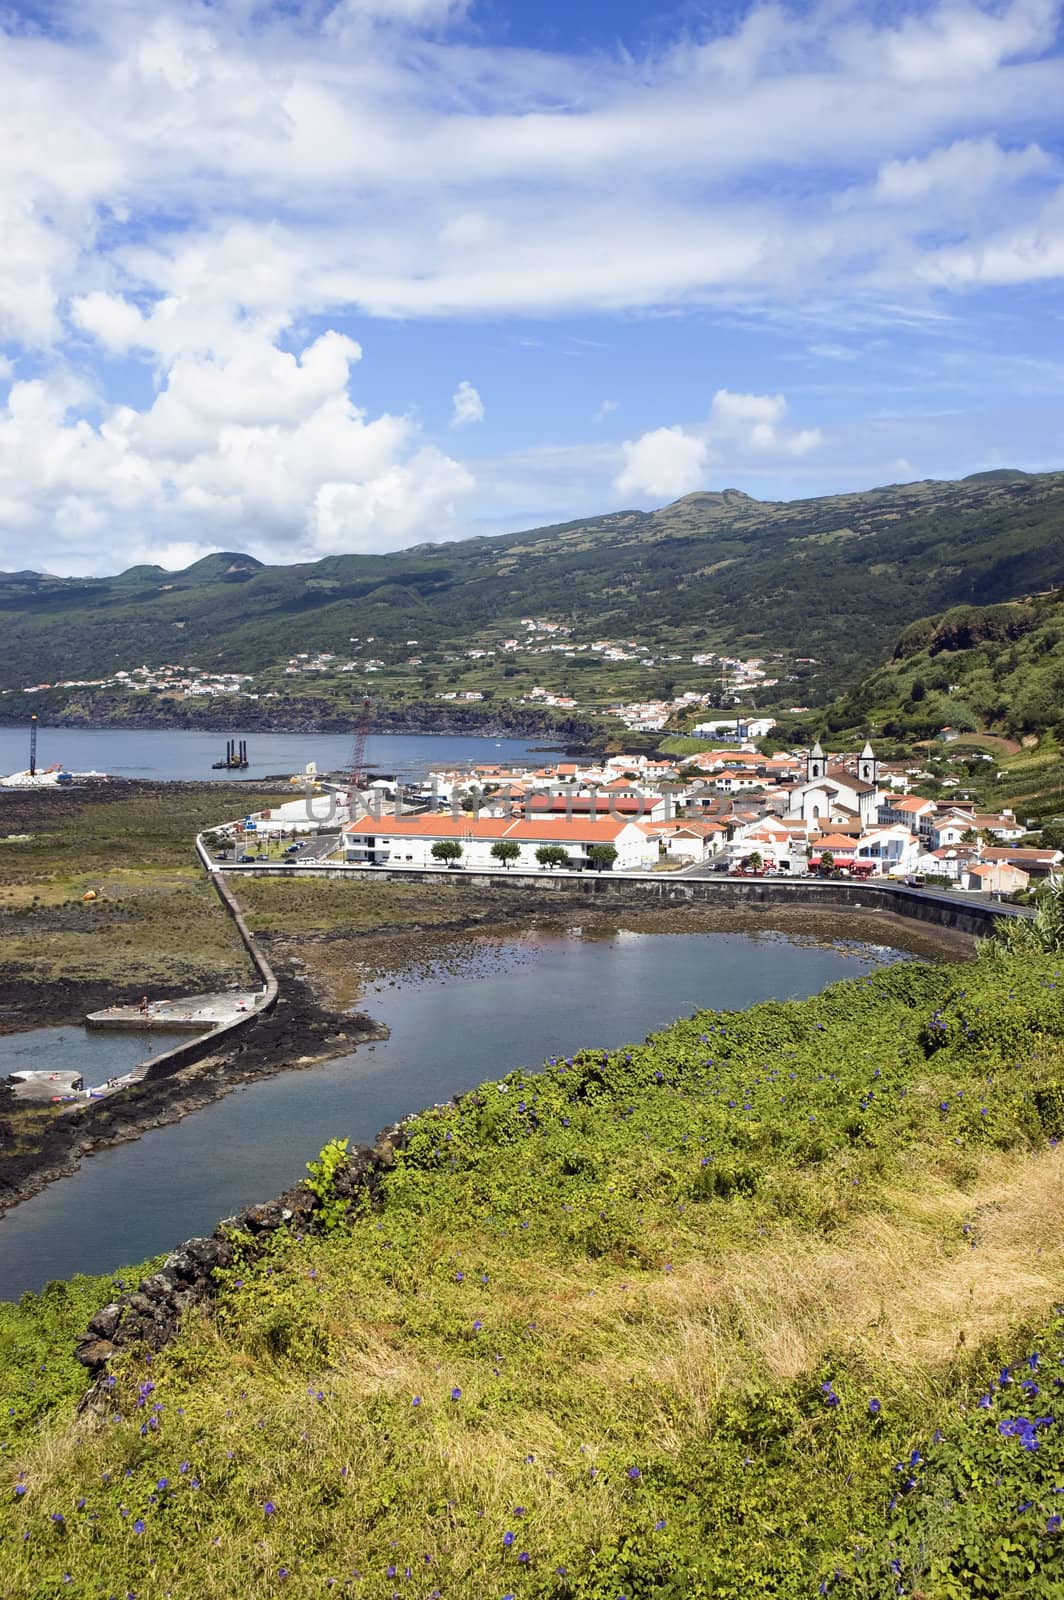 Village of Lages do Pico in Pico island, Azores, Portugal
